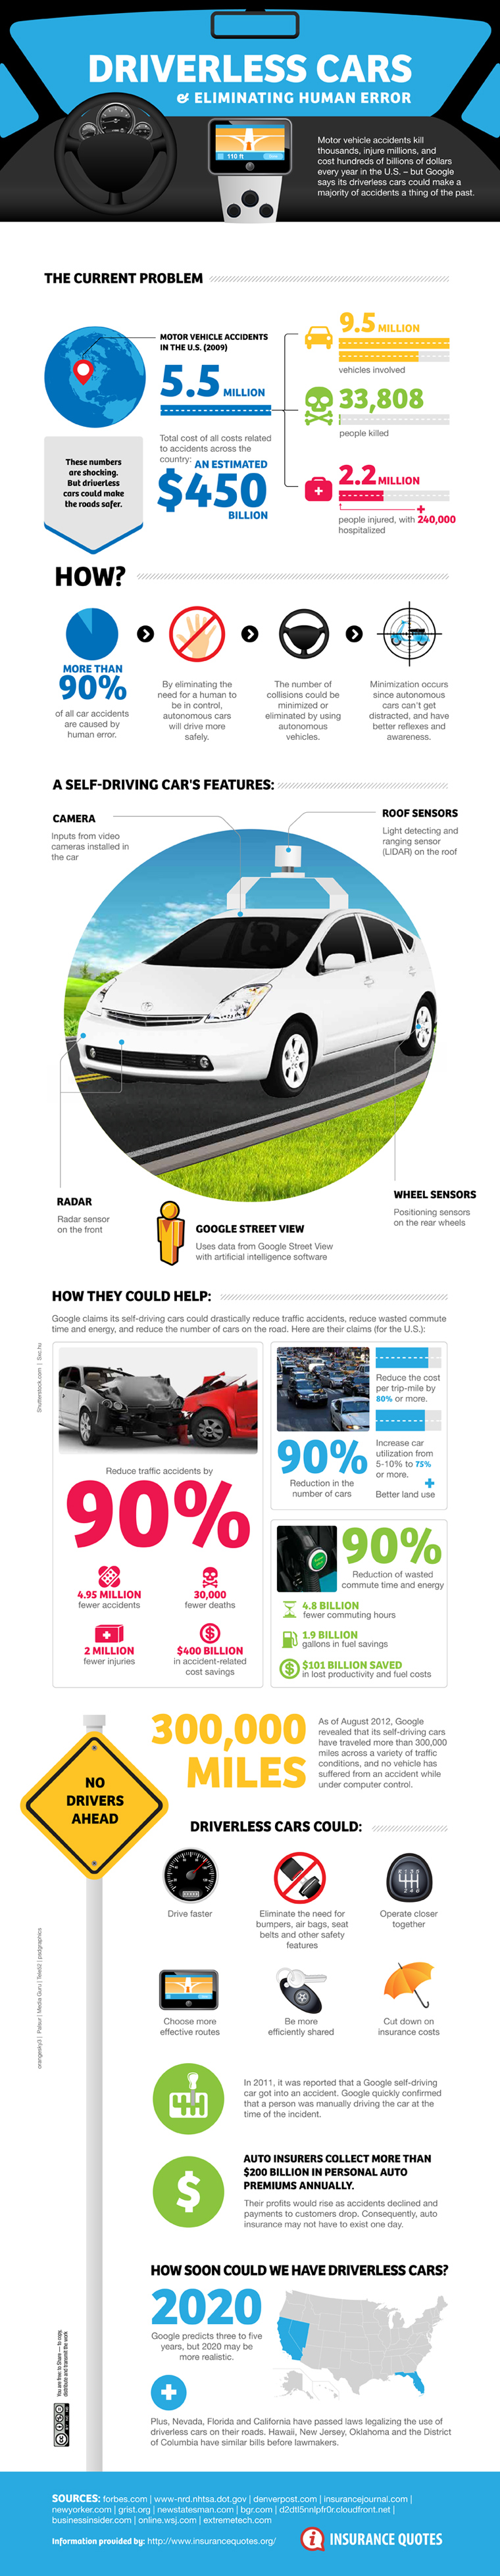 self-driving cars infographic